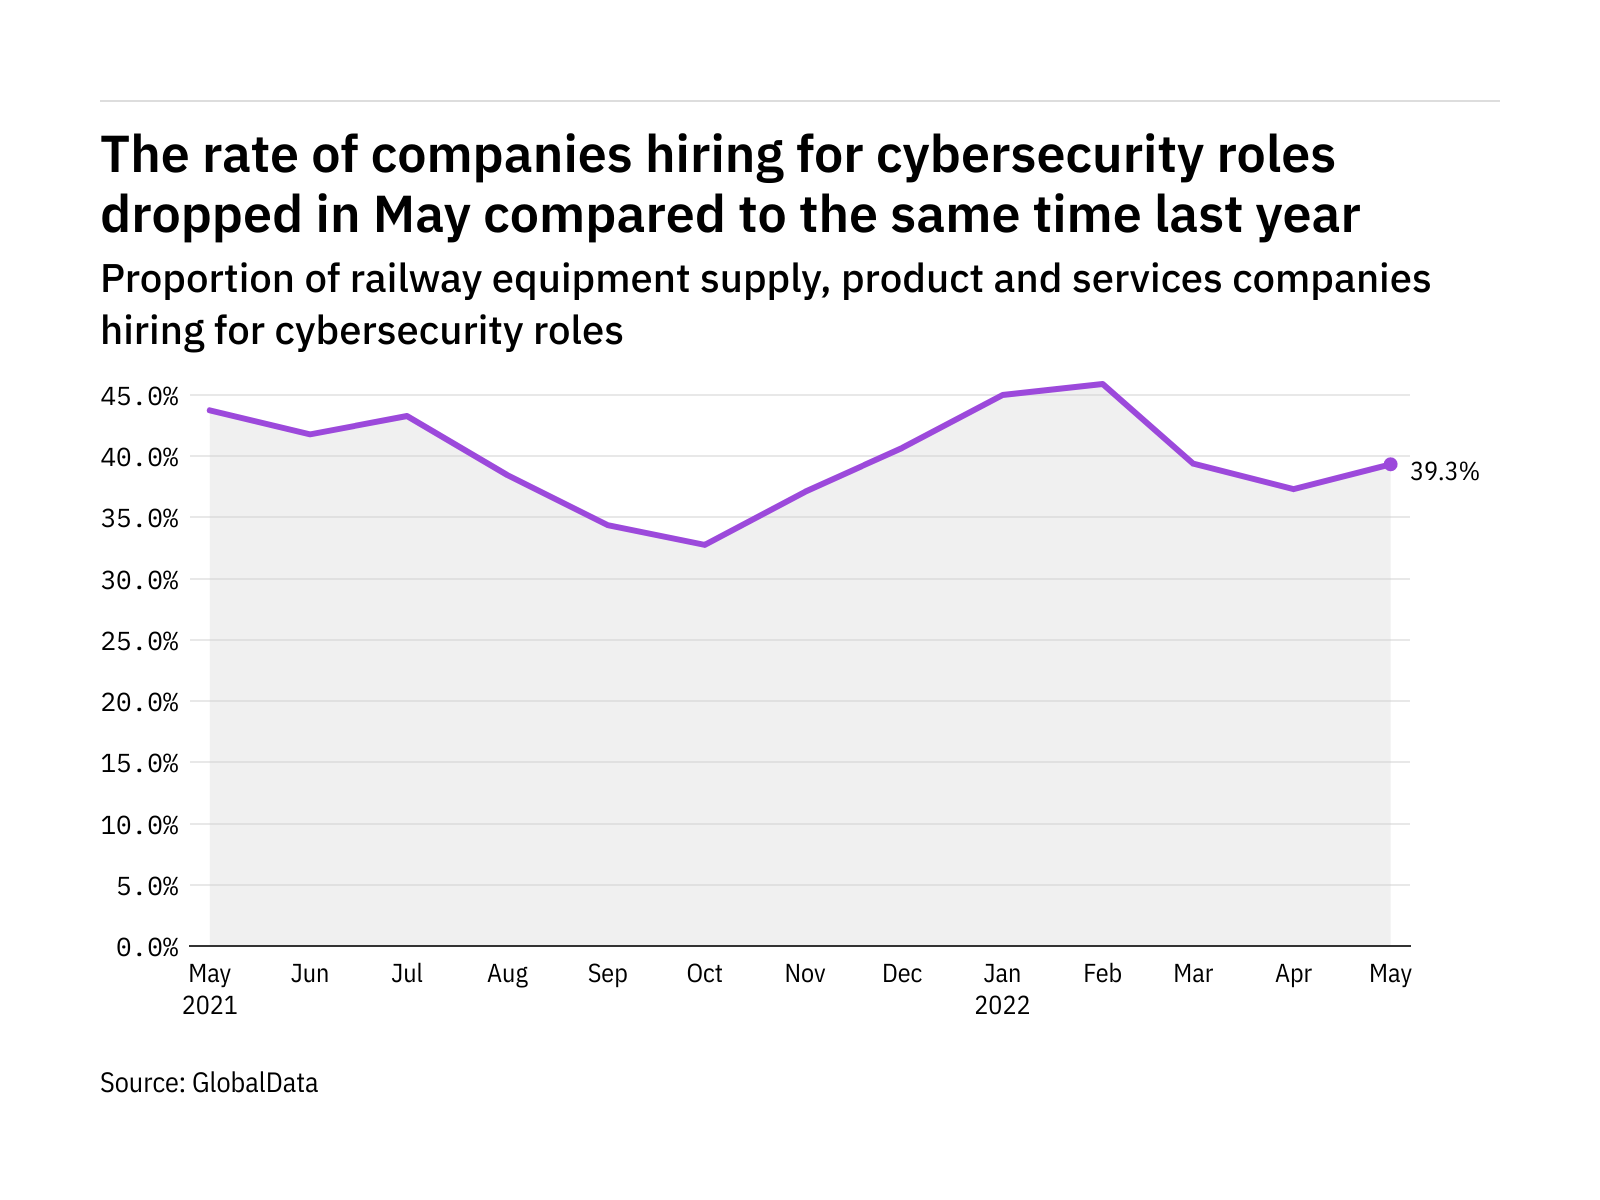 Cybersecurity hiring levels in the railway industry dropped in May 2022